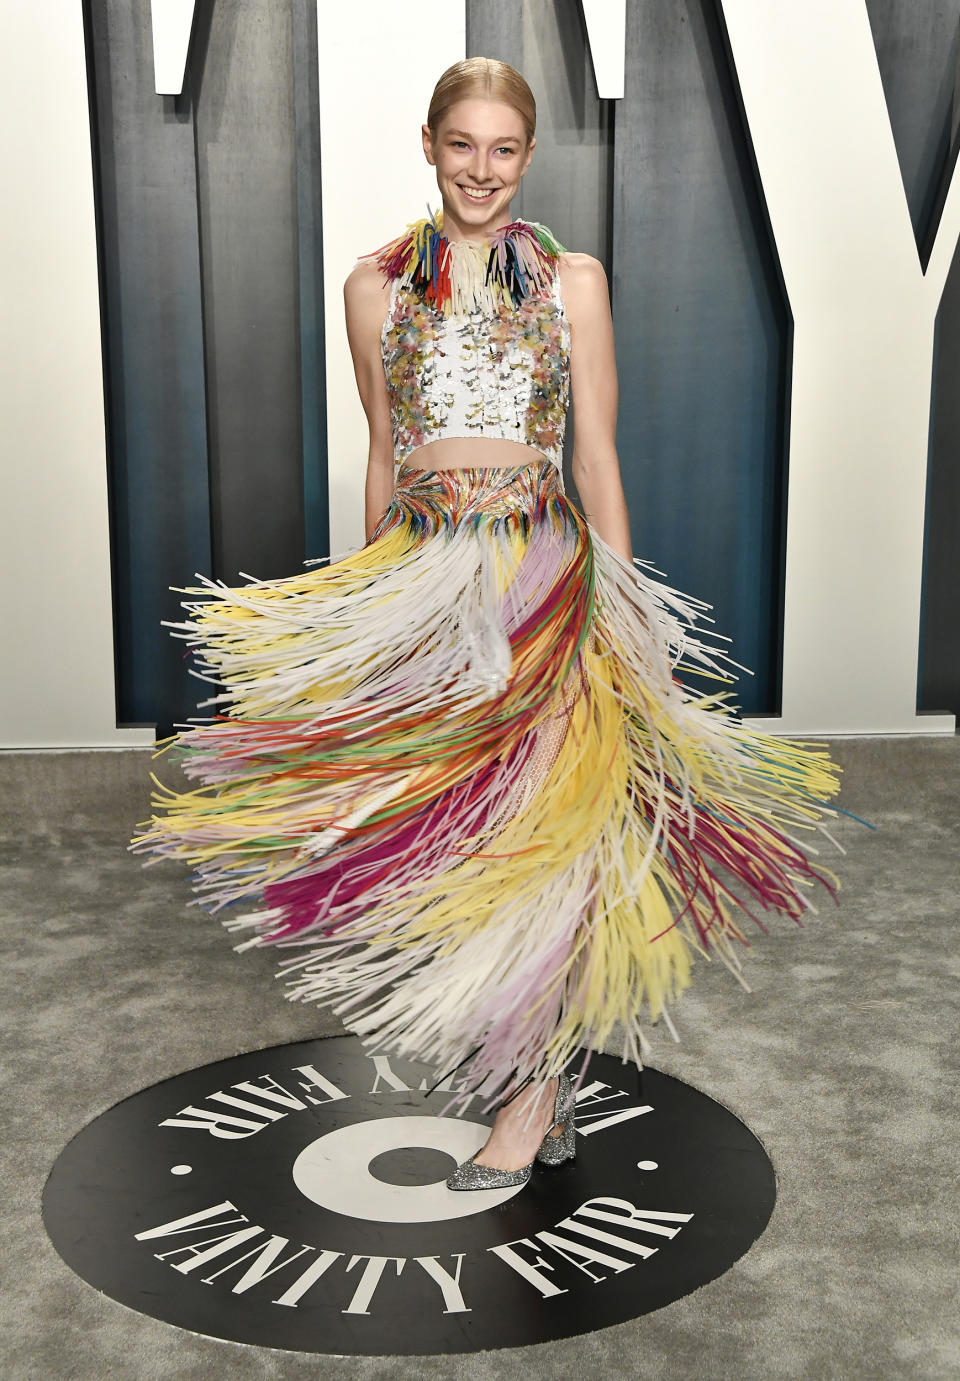 Hunter Schafer at the 2020 Vanity Fair Oscar Party on February 09, 2020 in Beverly Hills, CA. (Frazer Harrison / Getty Images)